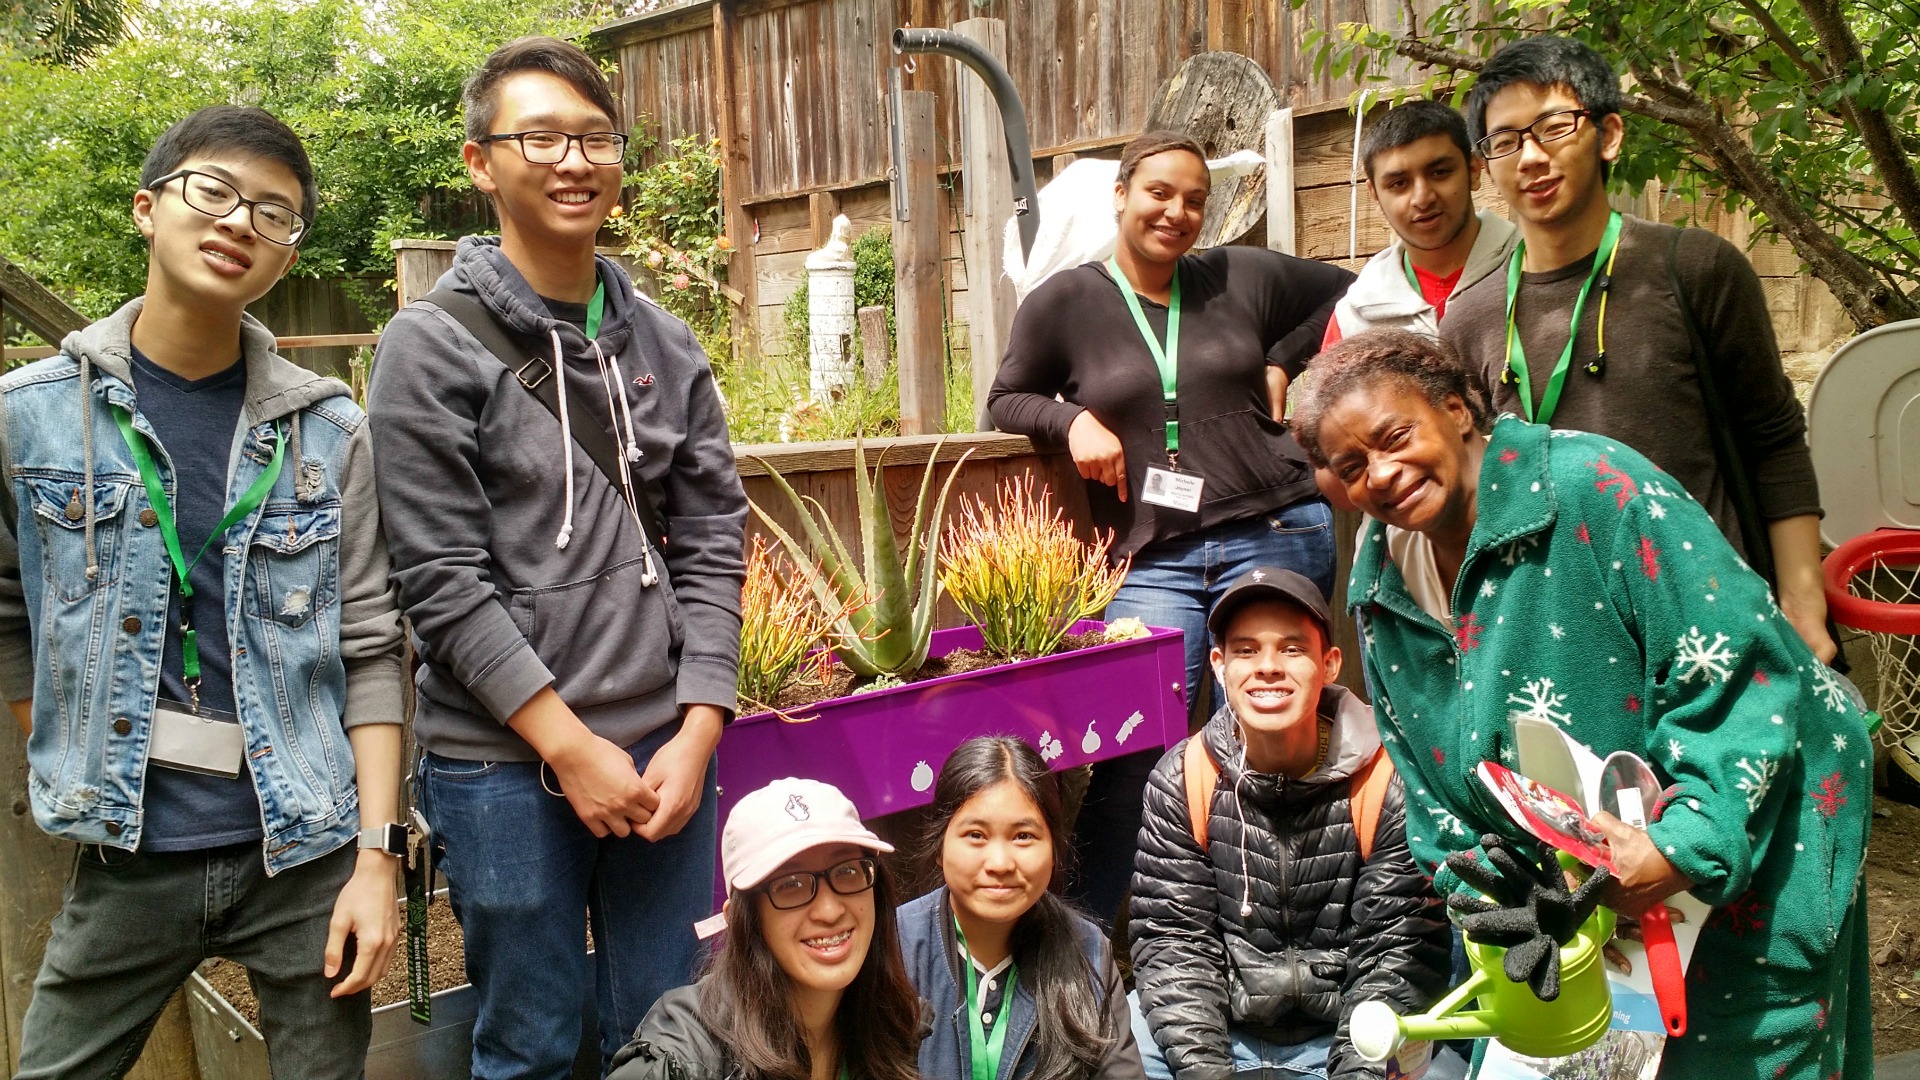 Participants in CommunityGrows' BEETS teen entrepreneur program learn how to build and maintain gardens, as well as other career development skills.